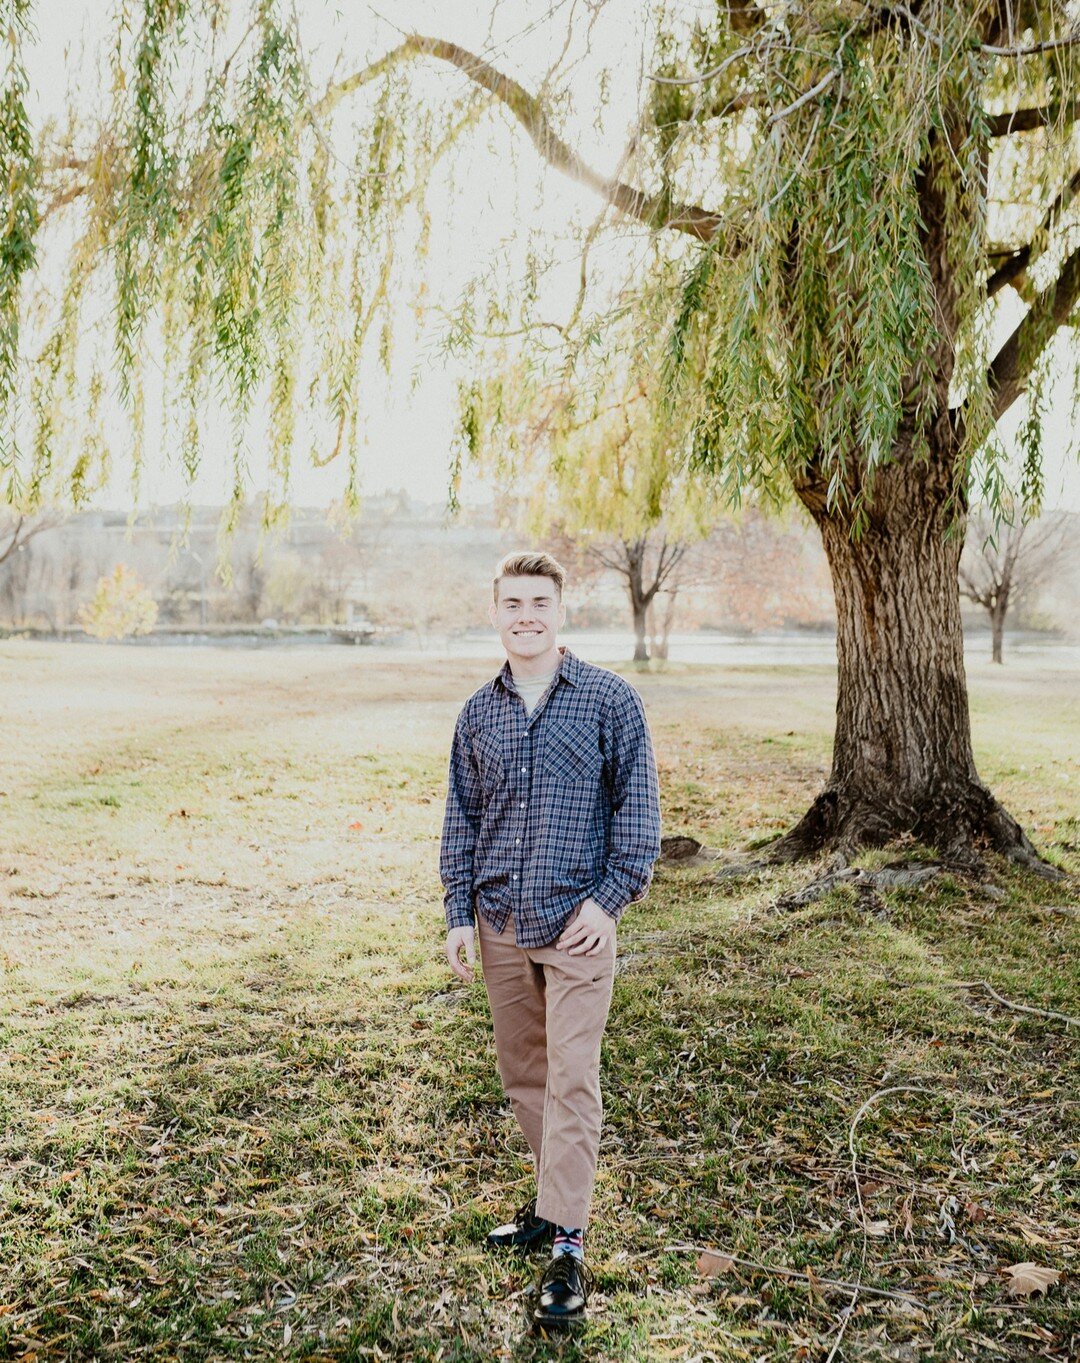 The golden light we captured during Jarom's mini-session would make you think we took these photos during the fall. Highlights from the session are now posted on the blog! 

#tricitiesphotographer #tricities #portraitphotography #pnw #northwestisbest